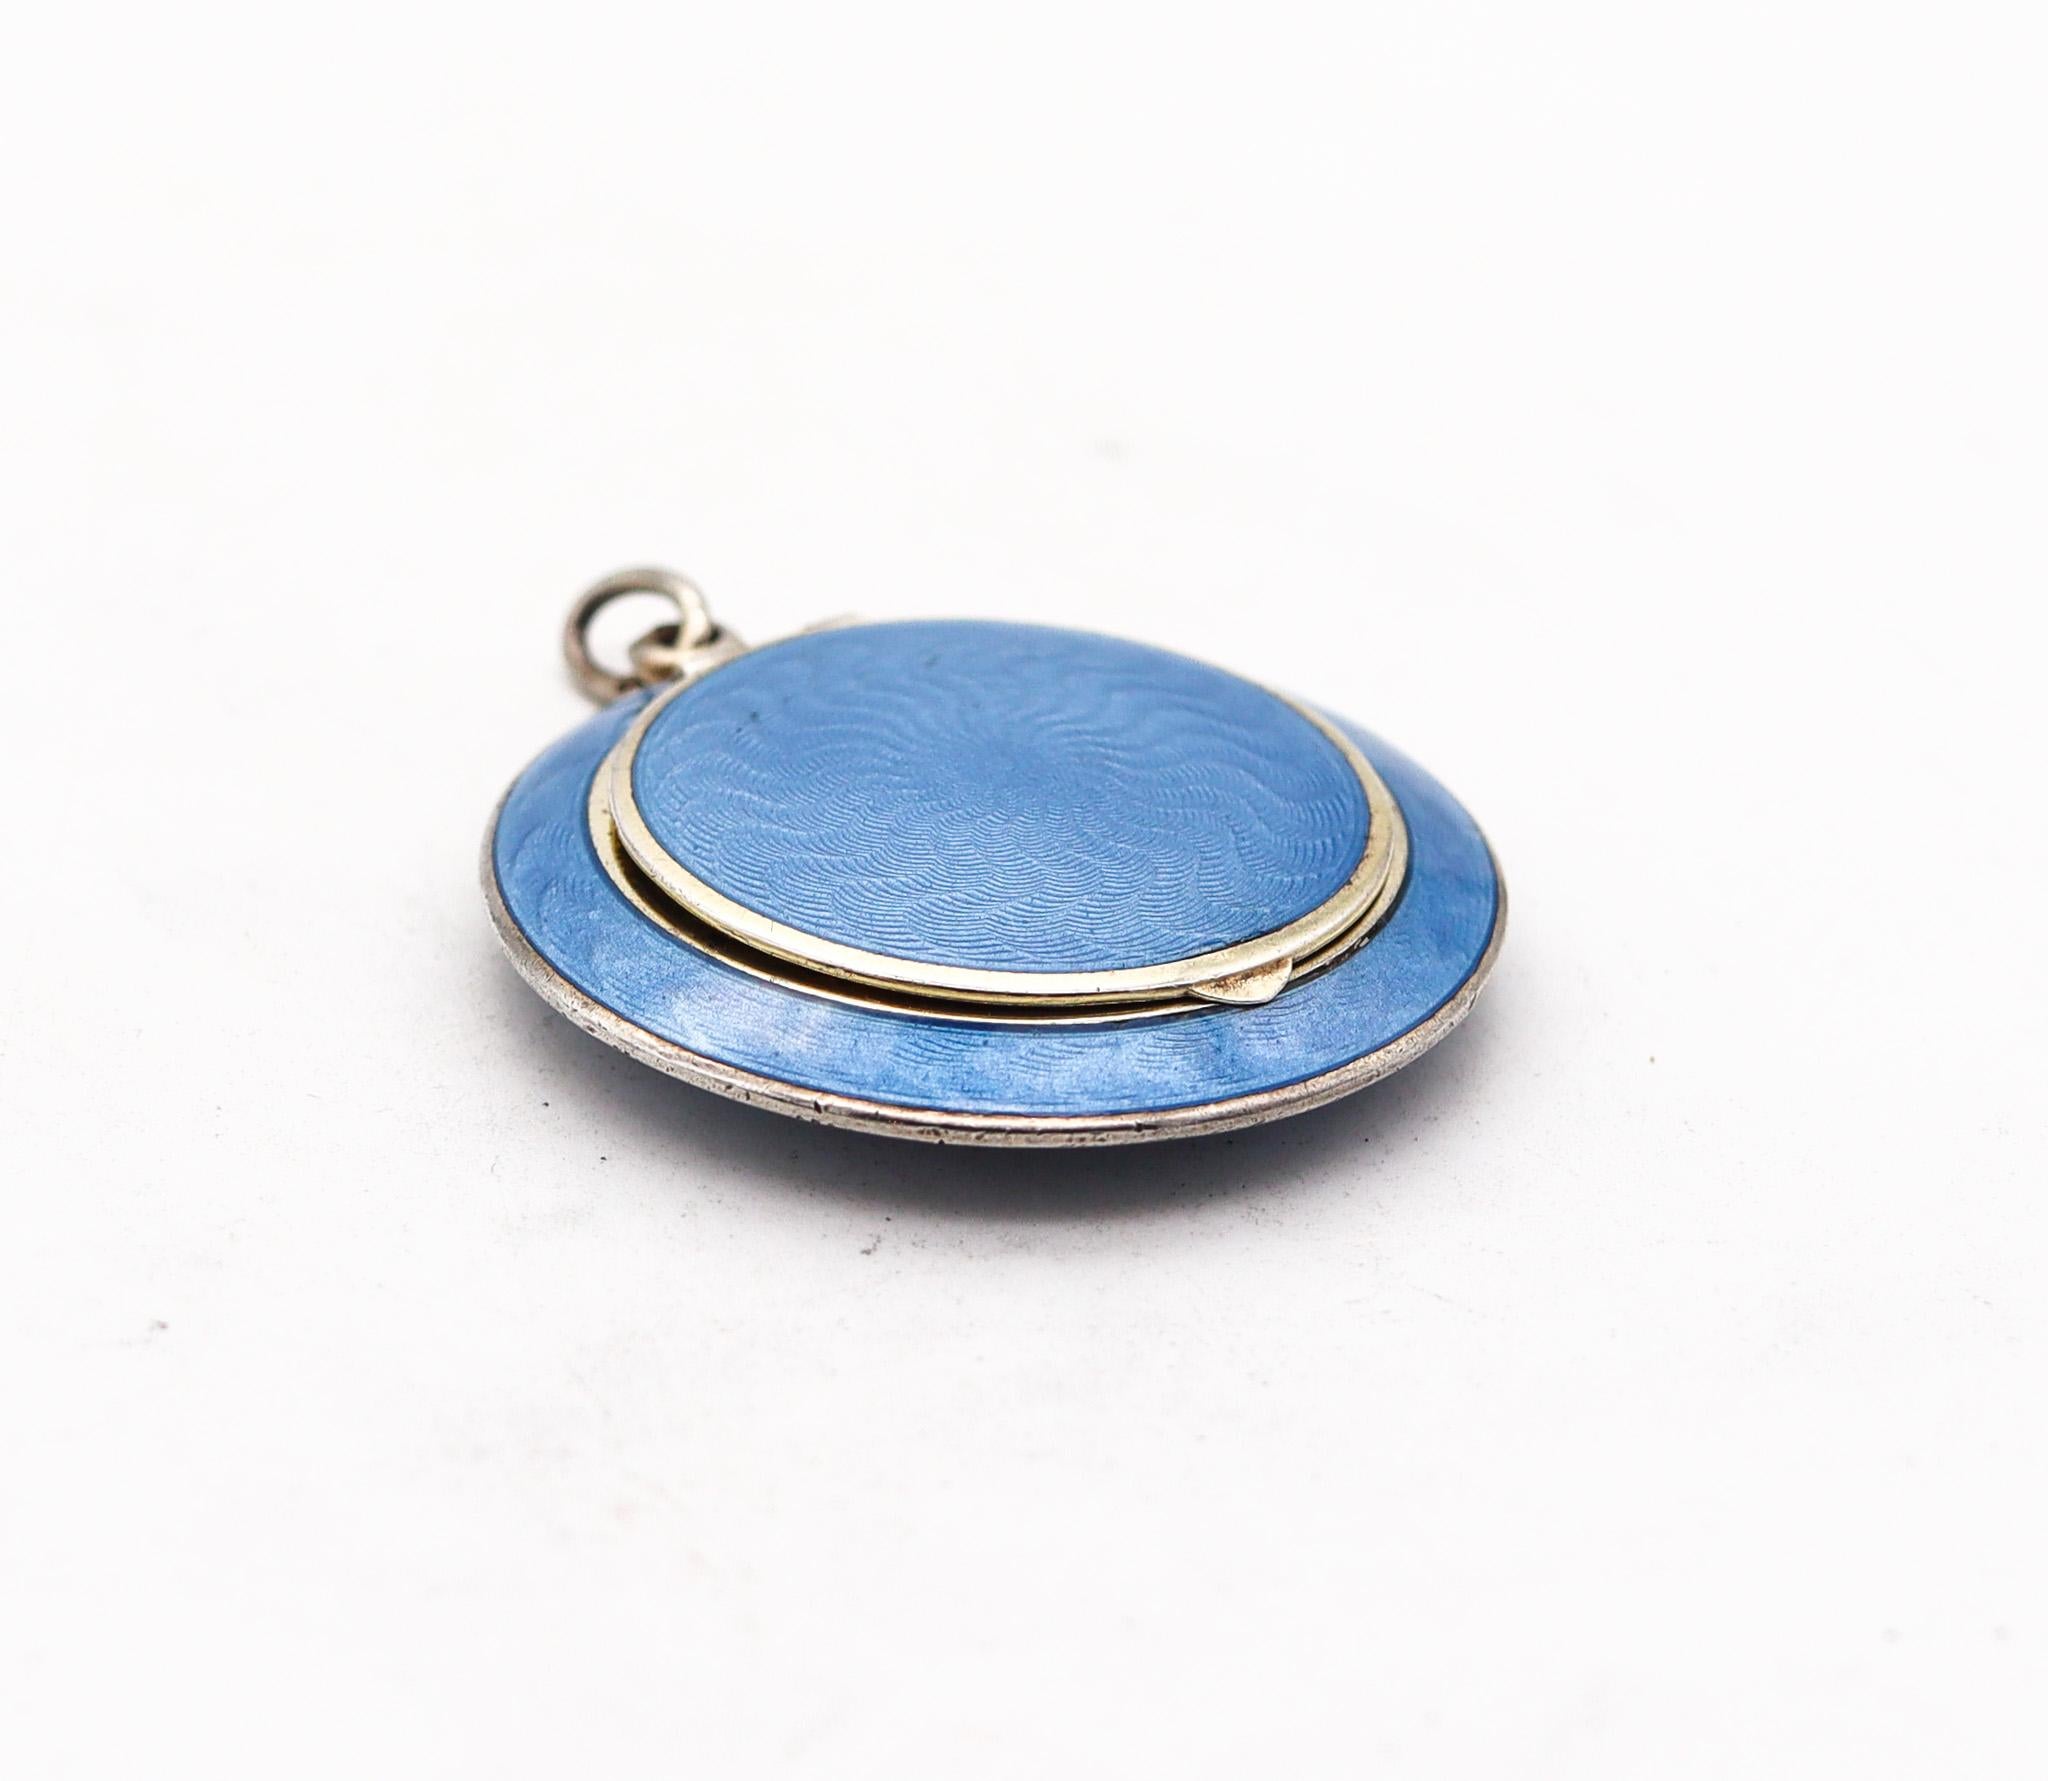 A French guilloche enameled pill box.

Very delicate French early 20th century enamel pendant, created during the late Edwardian and art nouveau period, circa 1910. This beautiful compact-pendant  was carefully crafted with impeccable details in